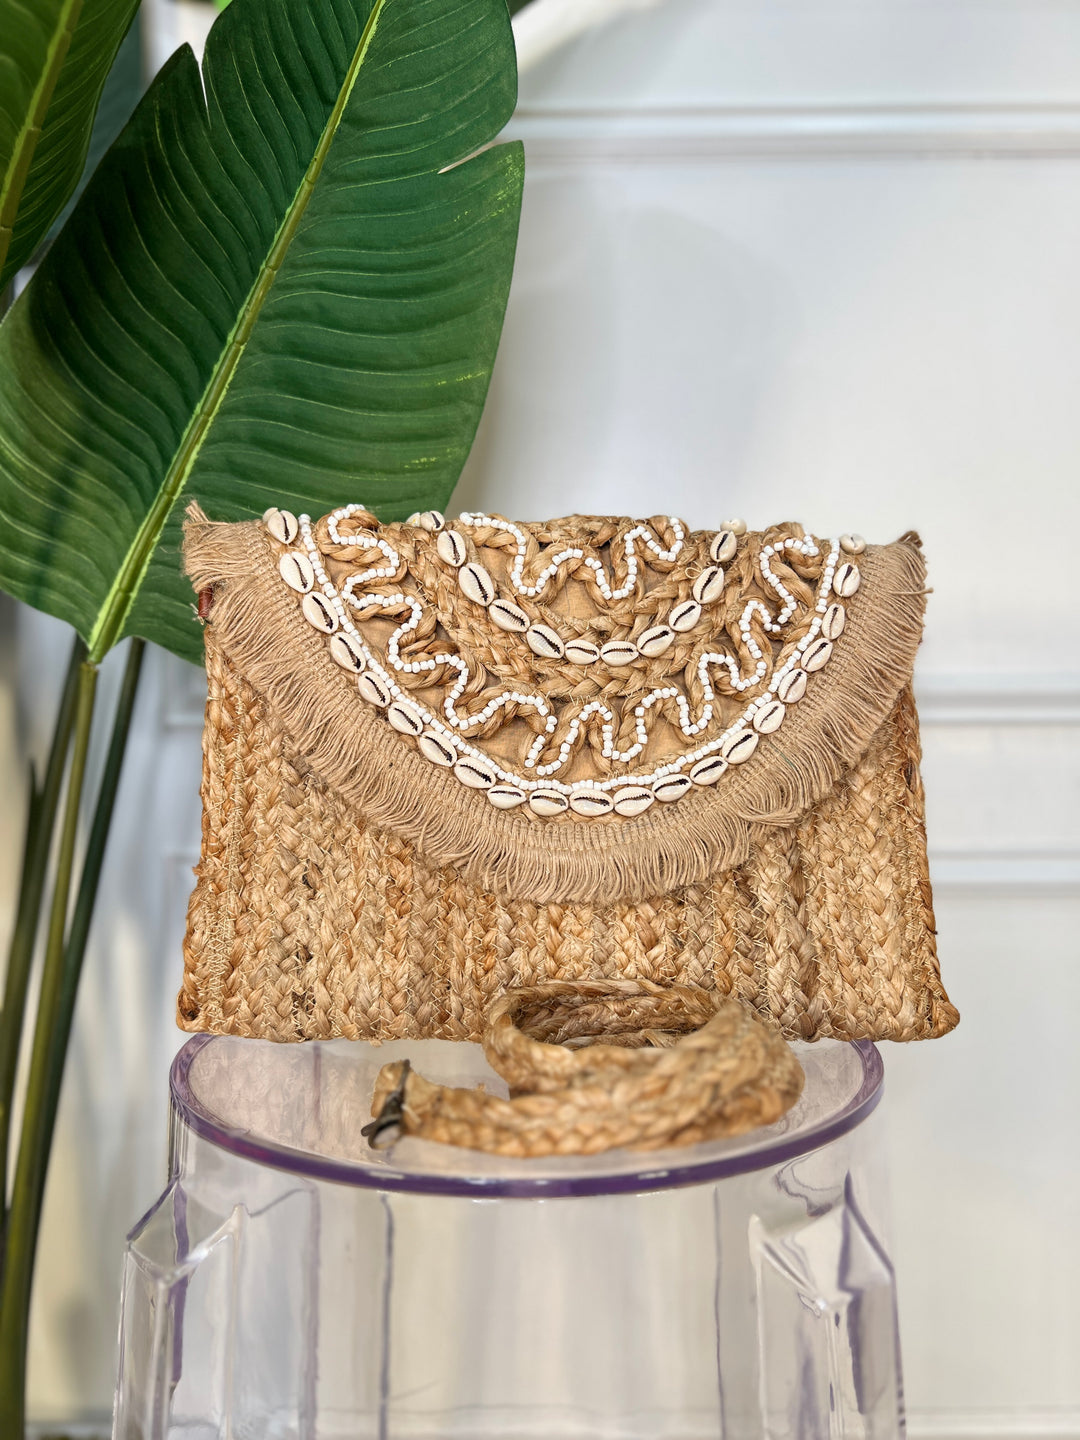 Shell & Straw Natural Clutch (White/Natural)